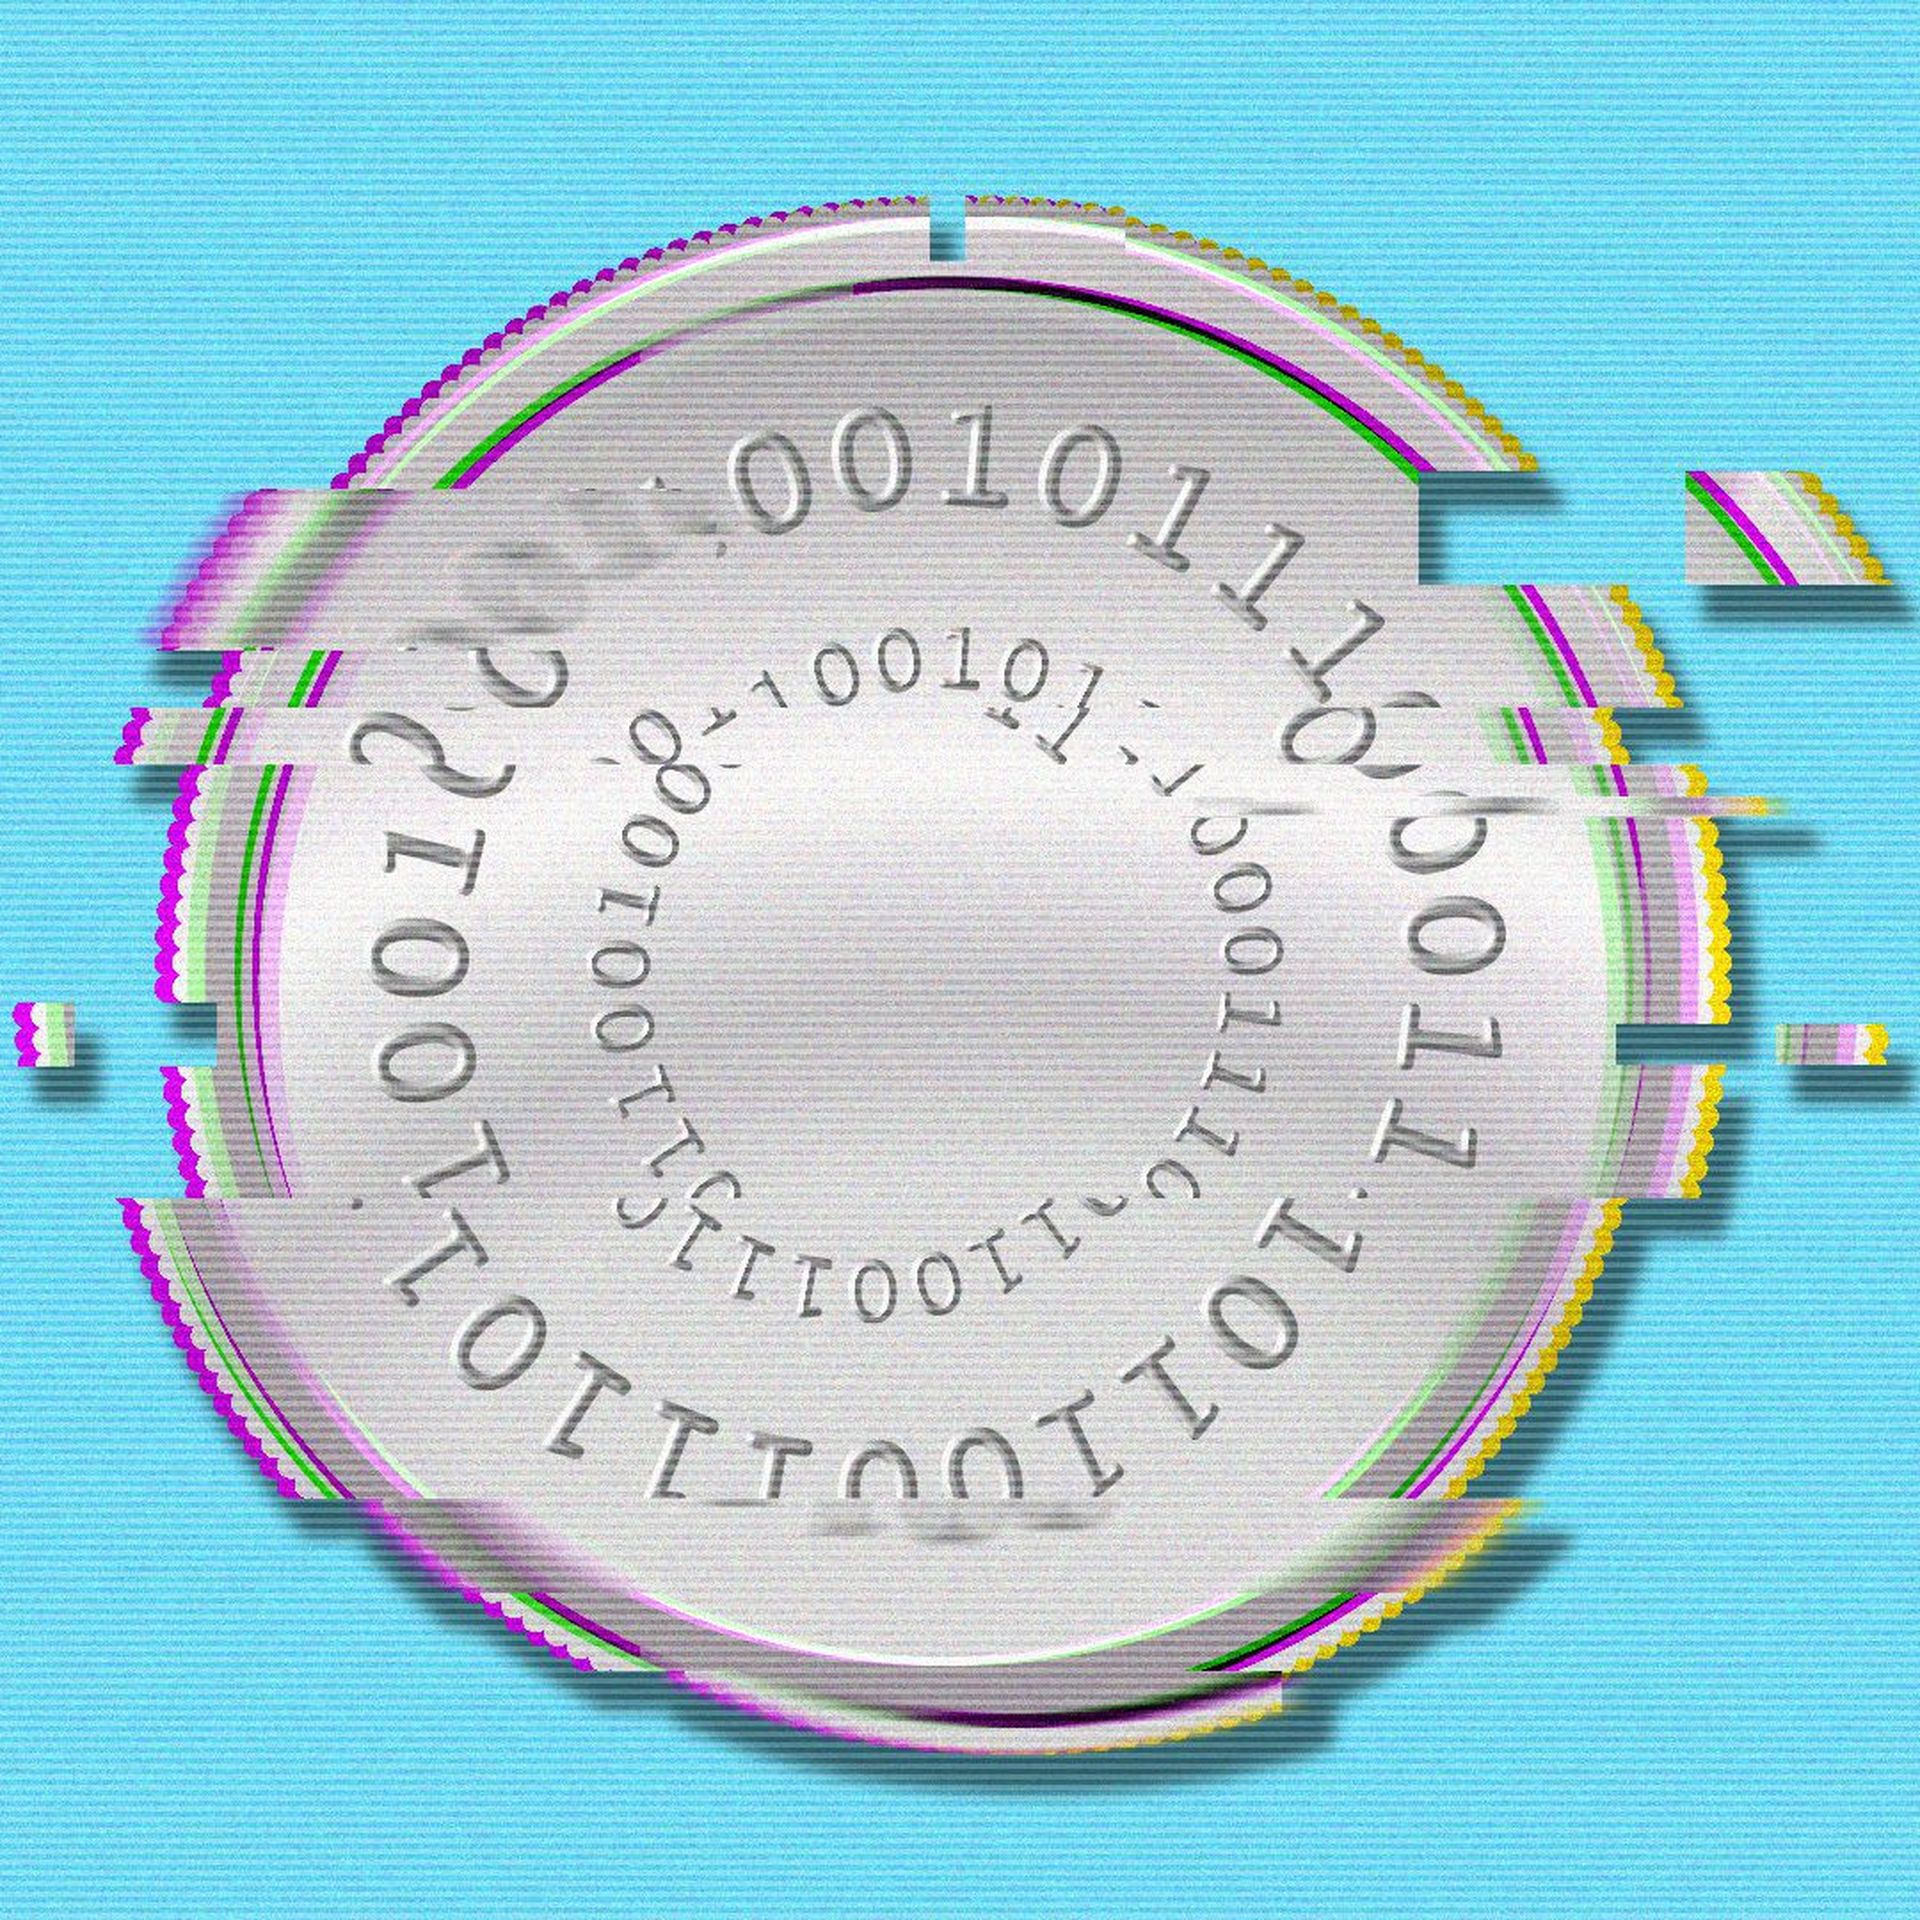 An illustration of a digital coin becoming distorted and breaking apart.